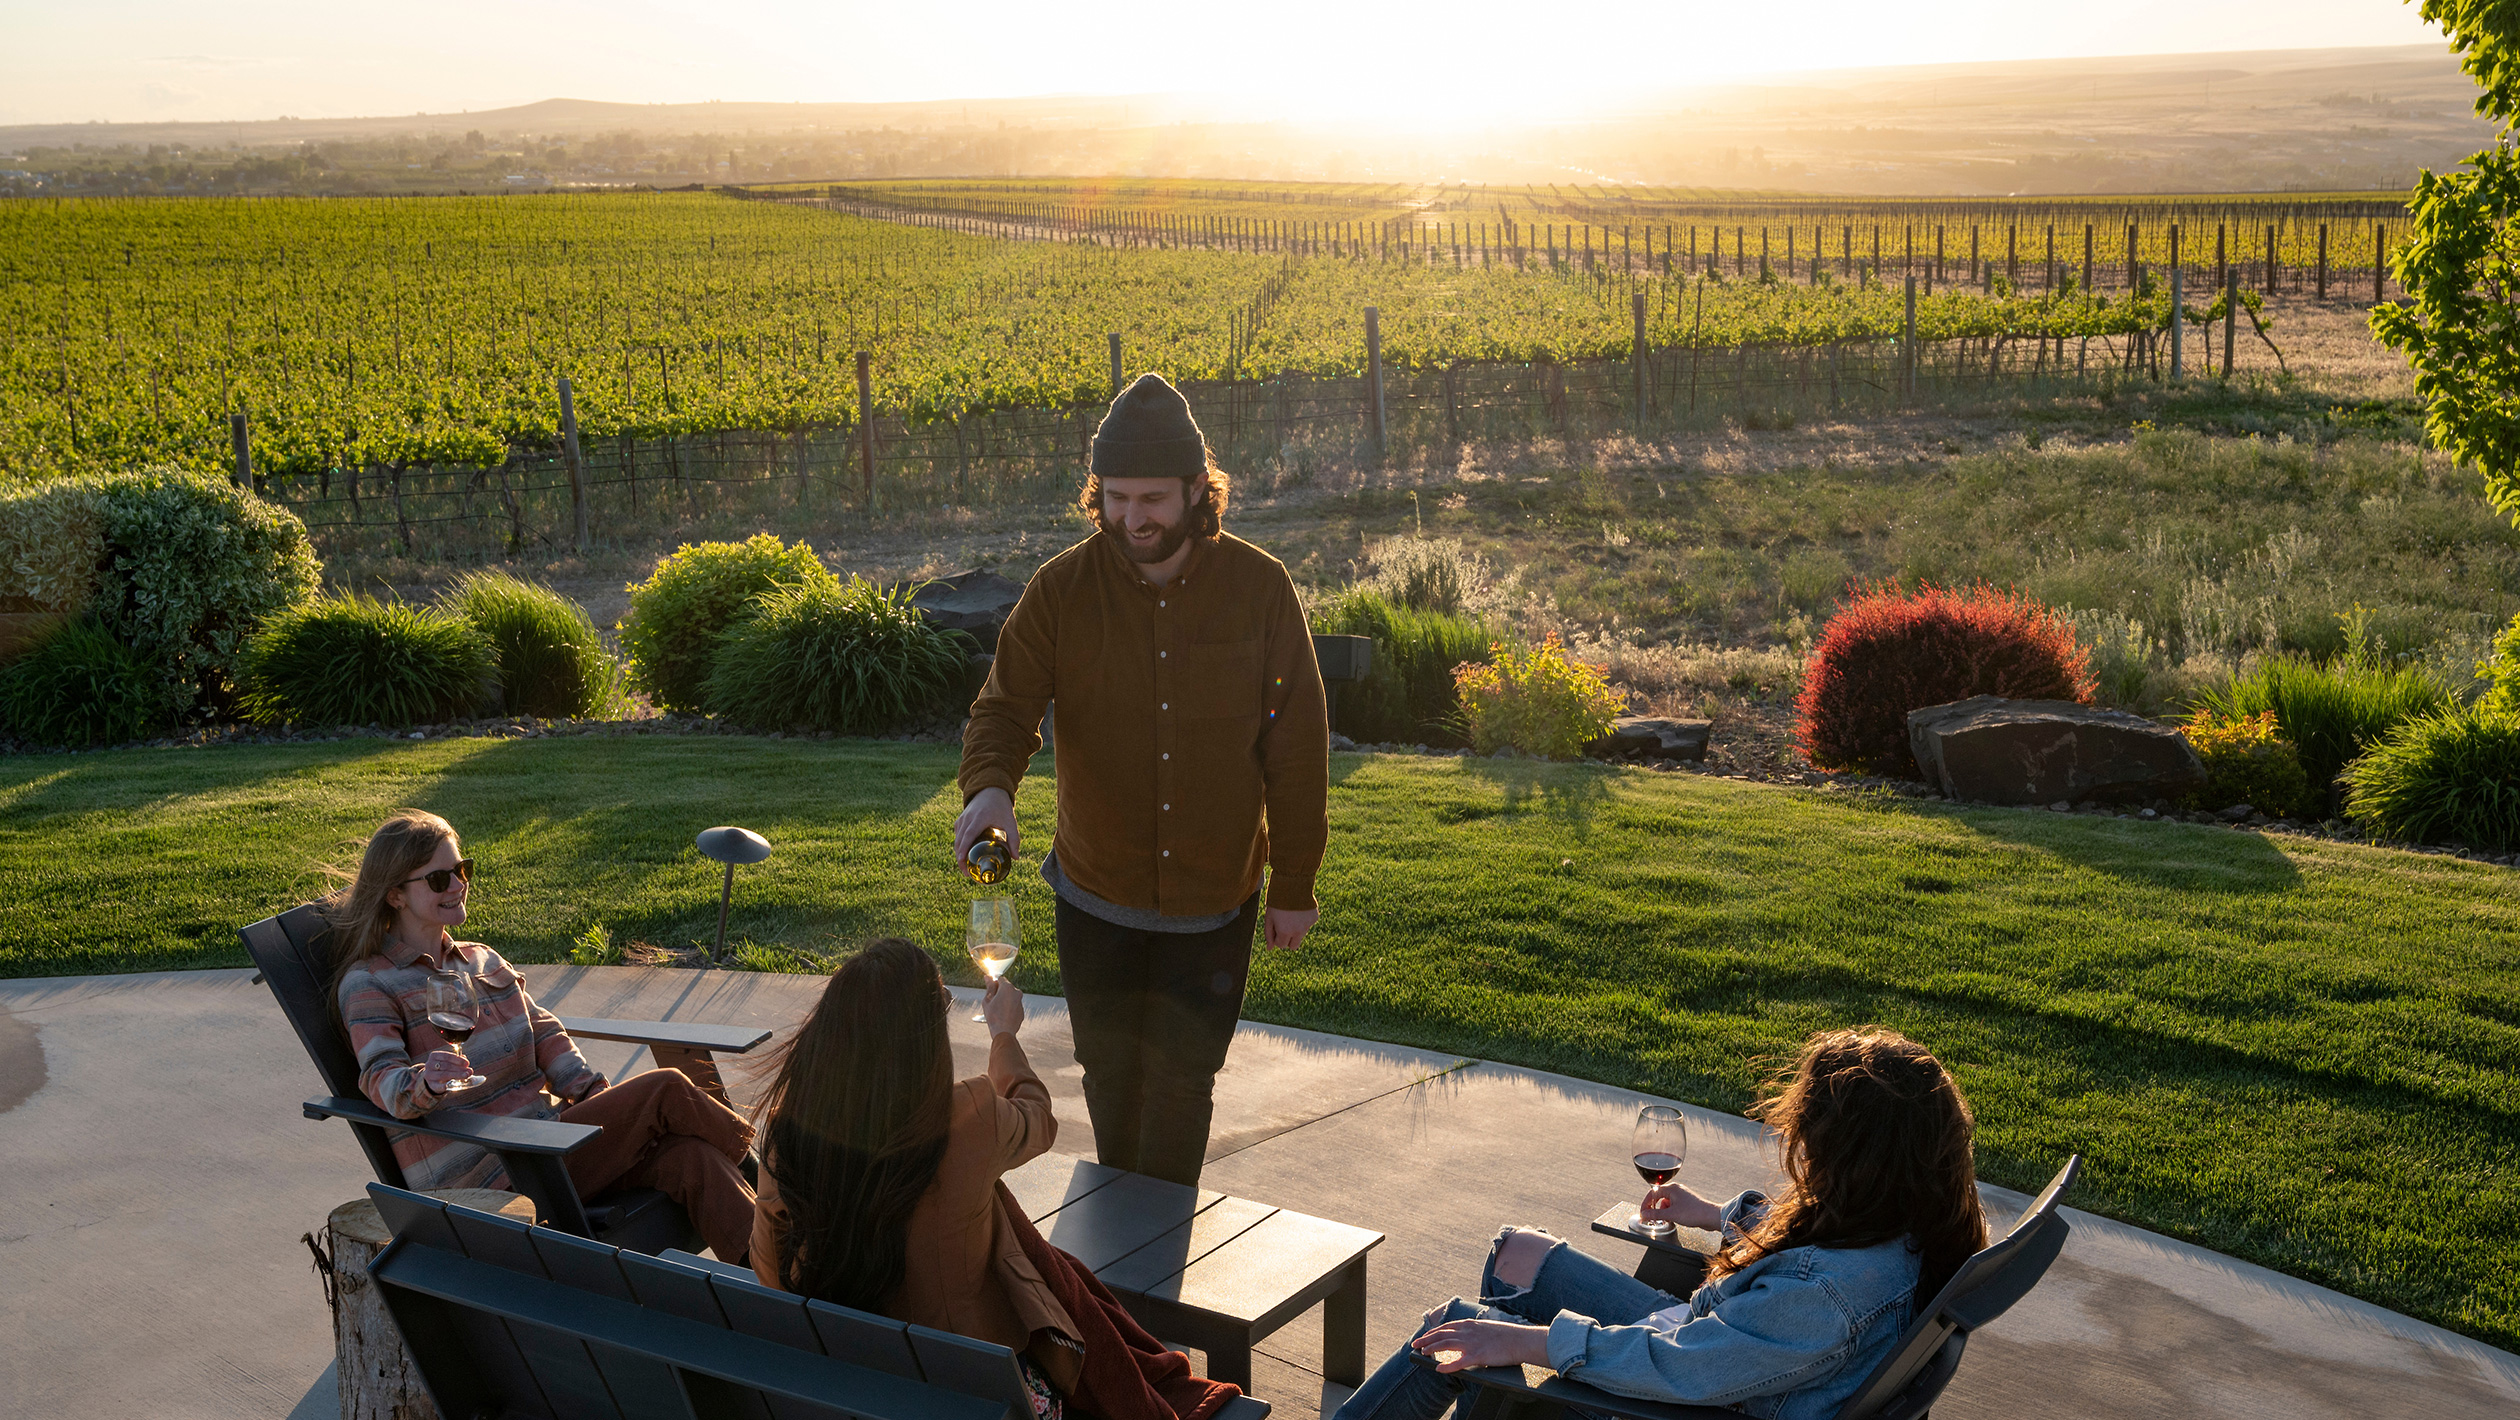 A group of wine drinkers relax in front of a Washington state vineyard before sunset